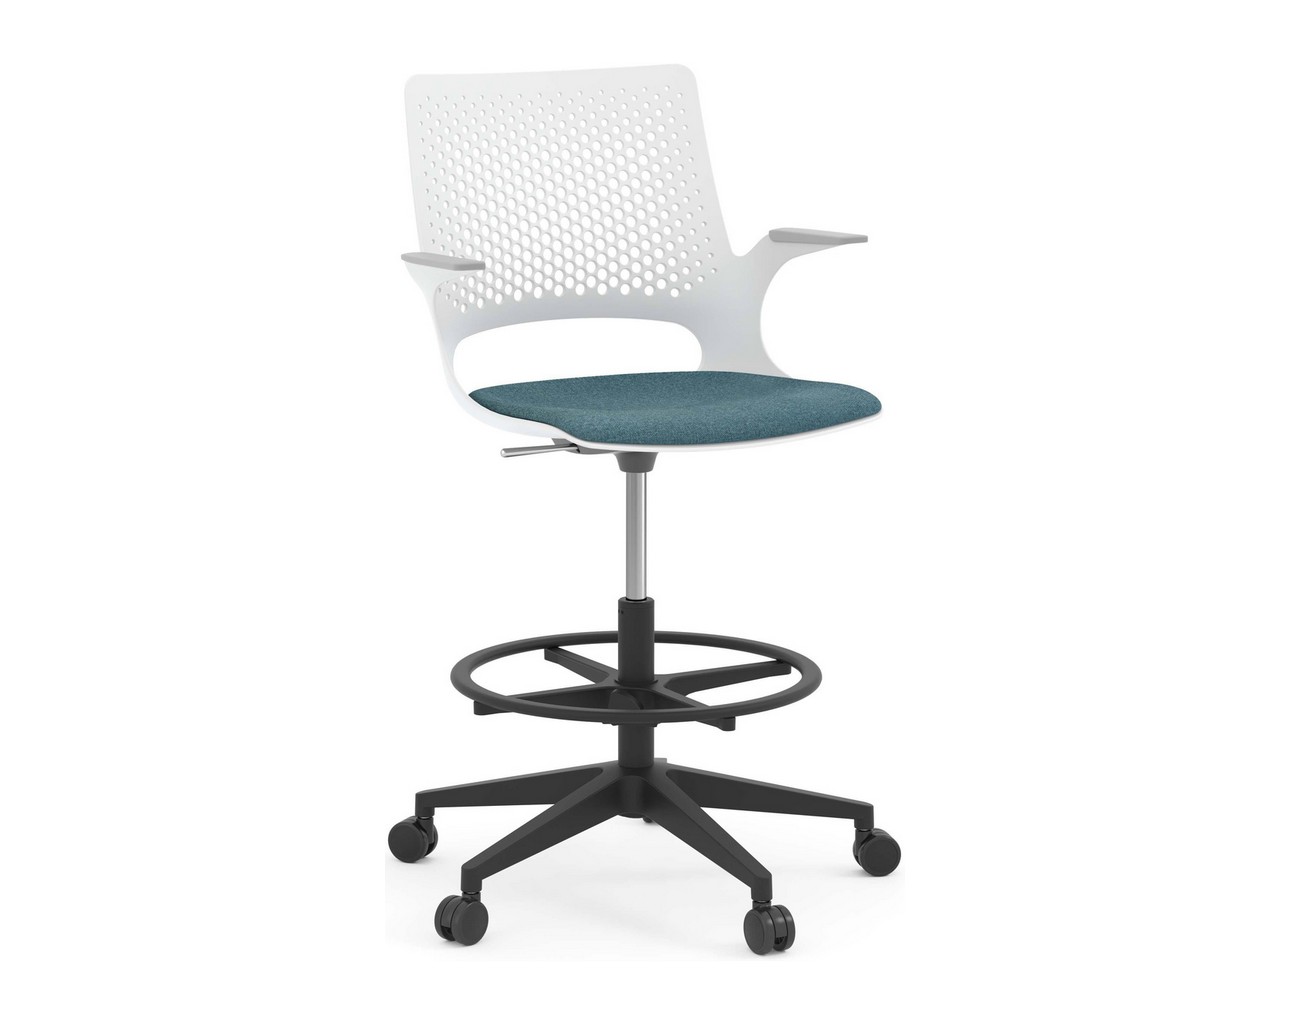 Harmony Drafting Chair – White Frame with Teal Seat